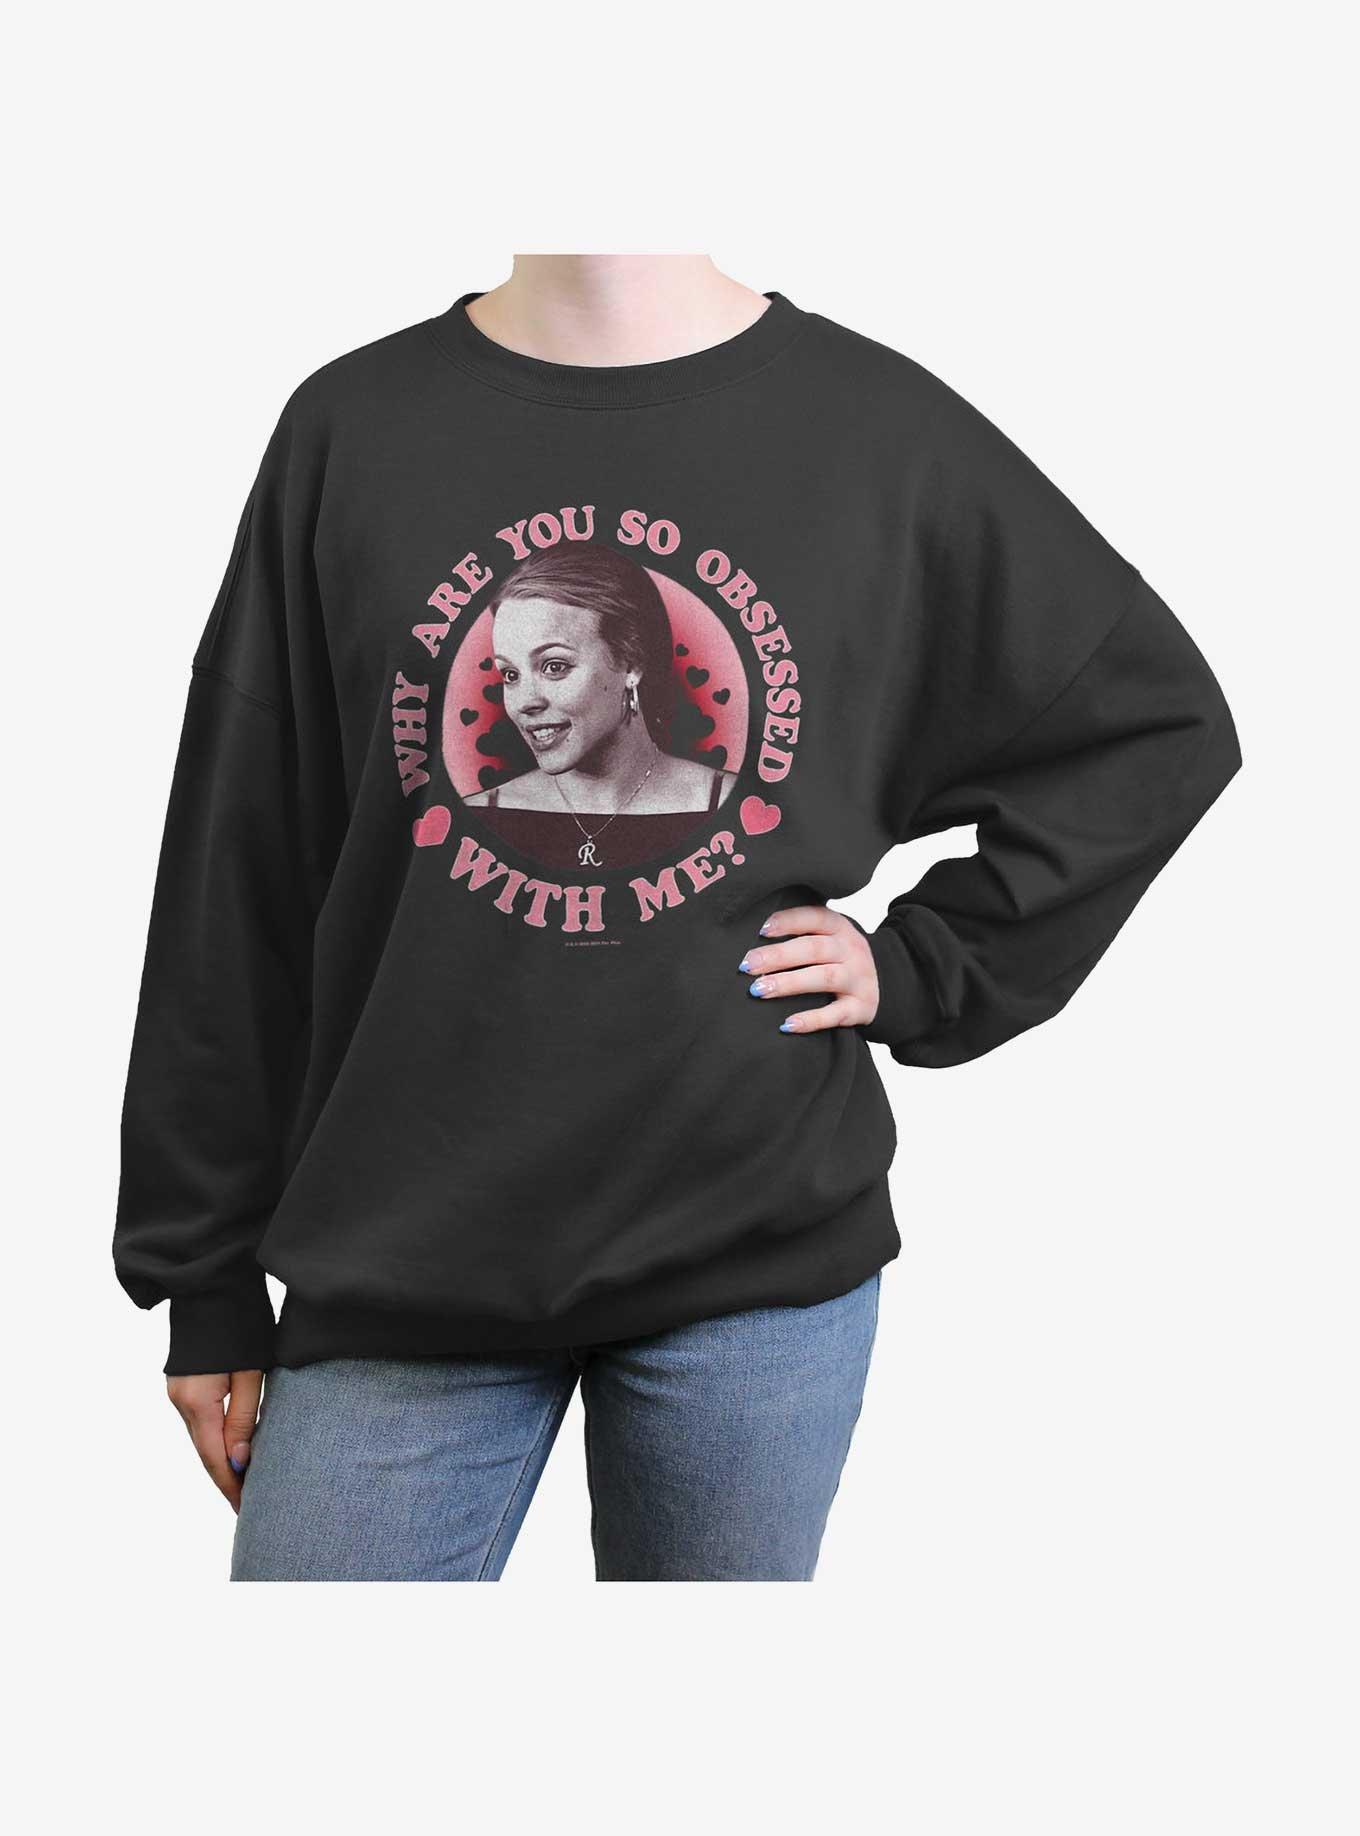 Mean Girls Obsessed With Me Girls Oversized Sweatshirt, CHARCOAL, hi-res